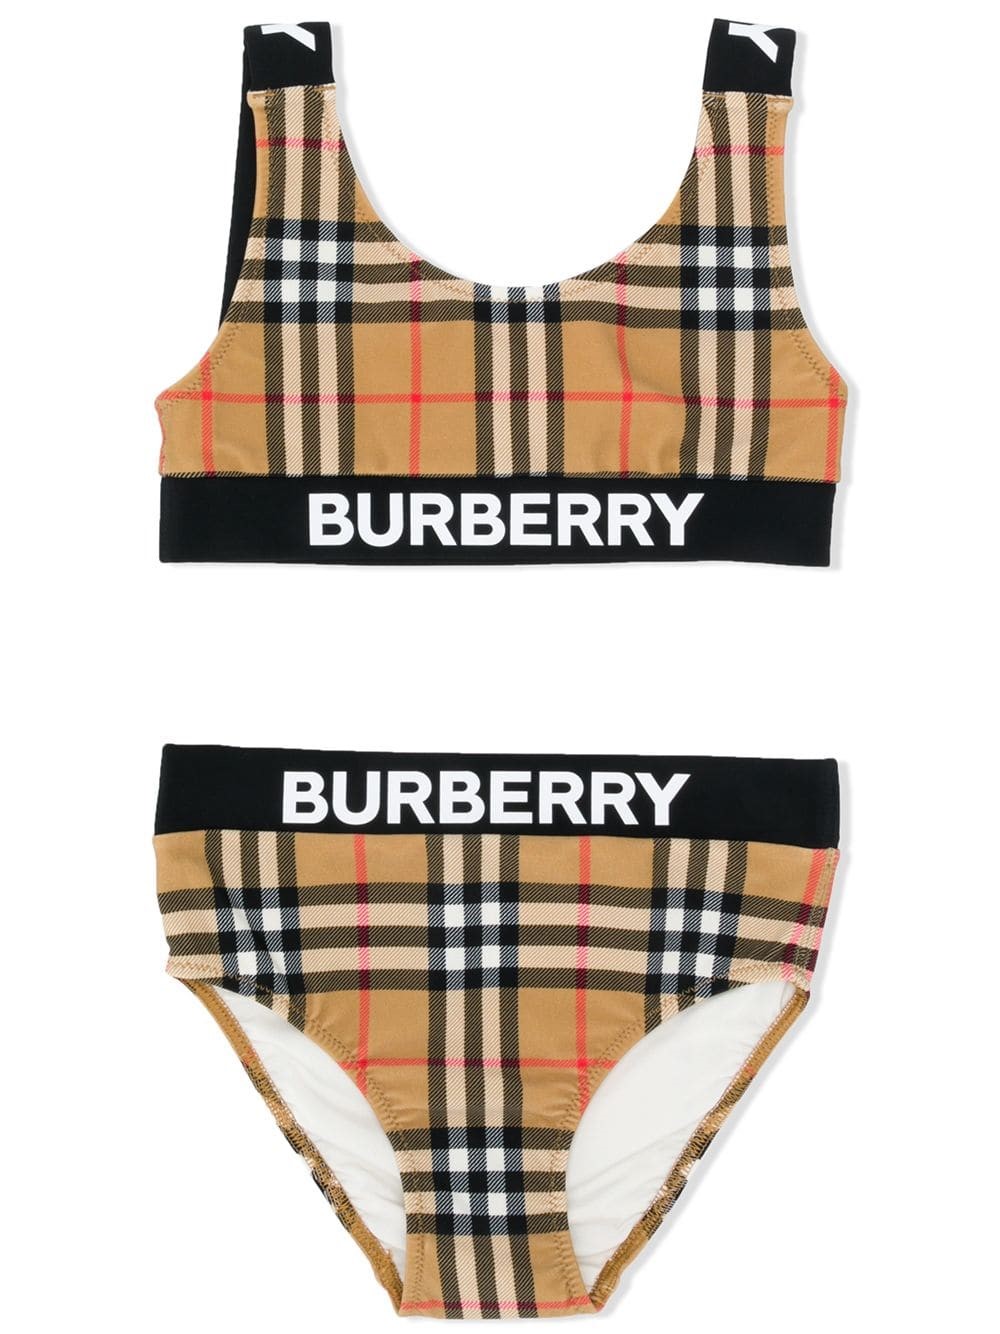 burberry for kids